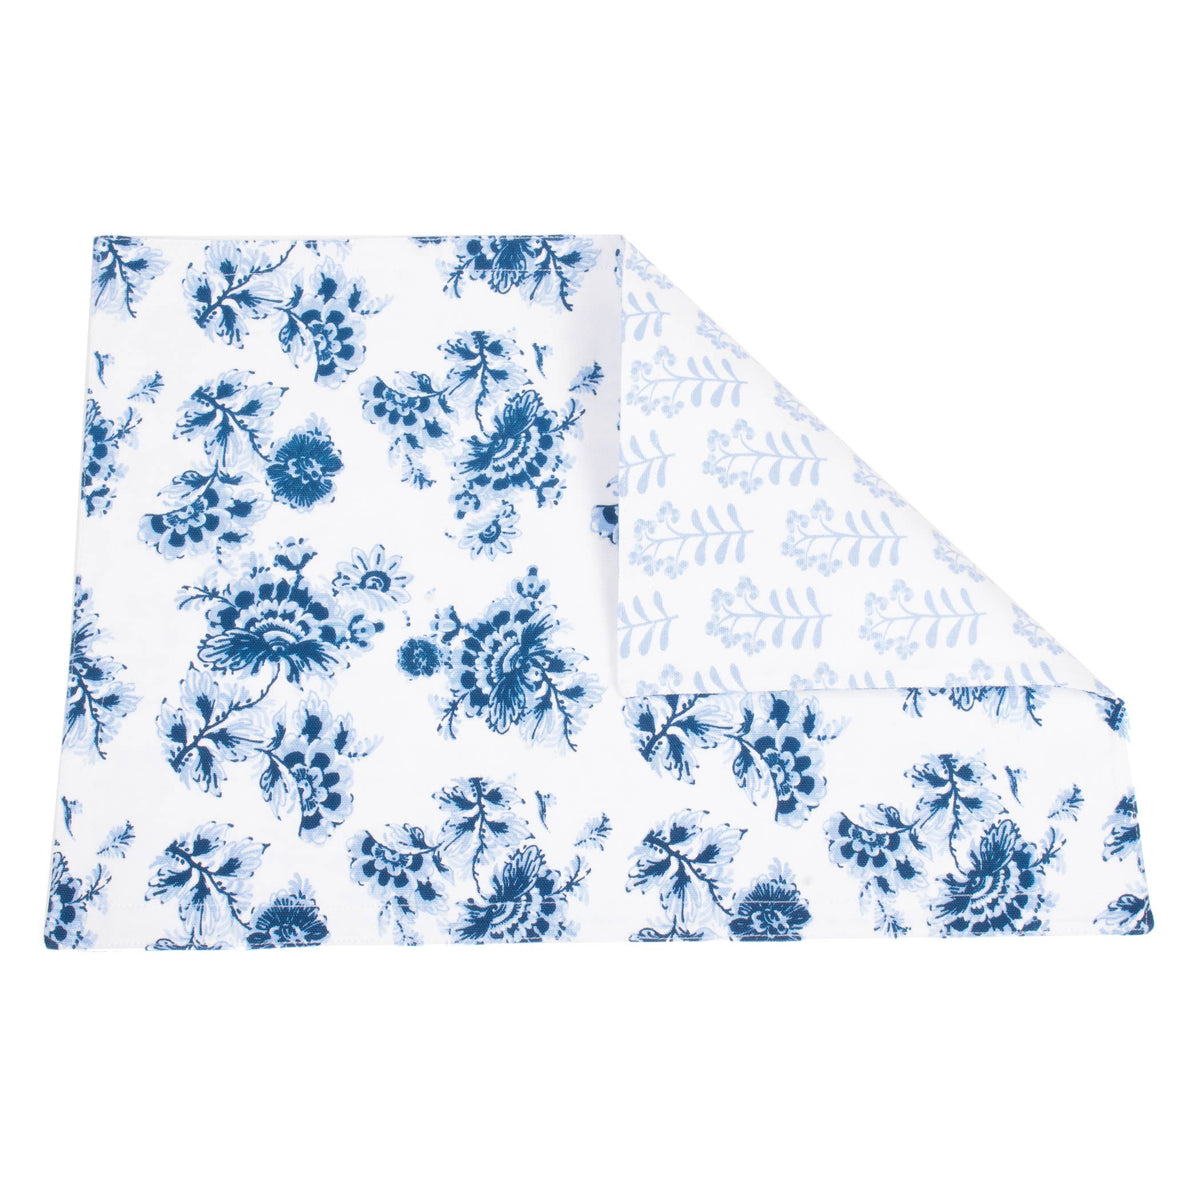 Blue Floral Printed Reversible Placemat Set - The Preppy Bunny